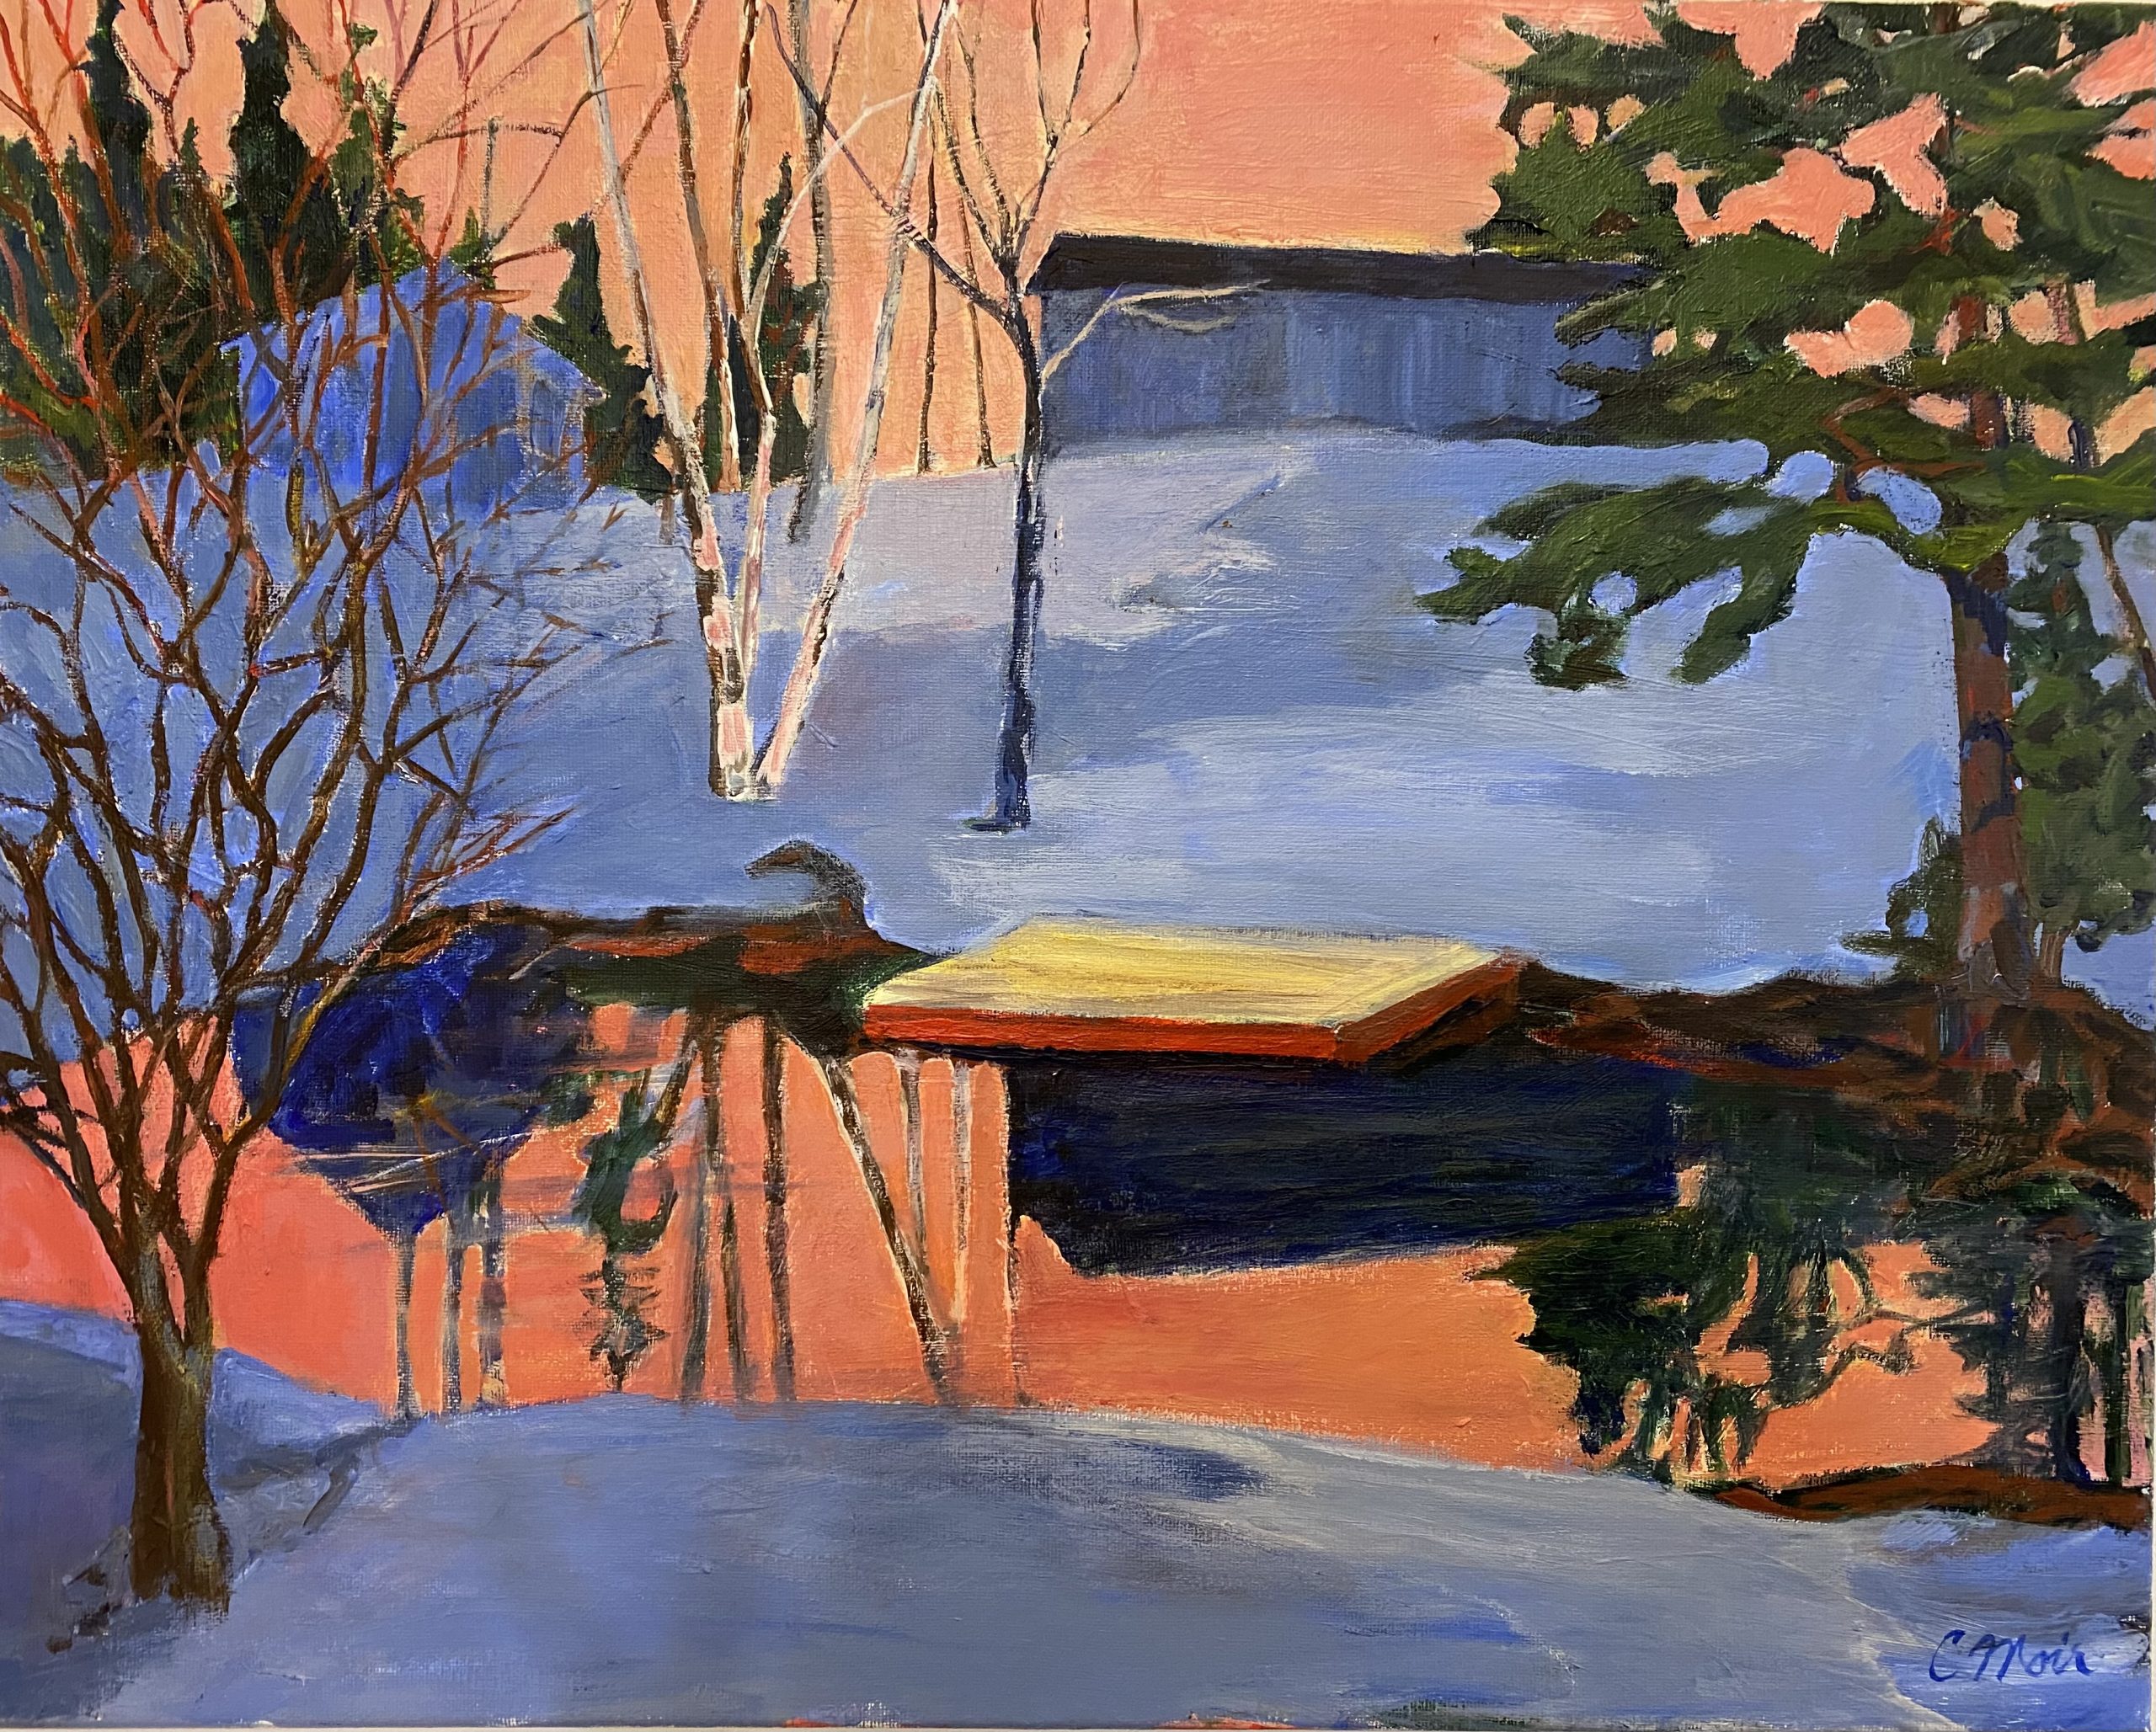 A painting of a late winter afternoon of the hillside and the small pond in her back yard during the COVID pandemic.